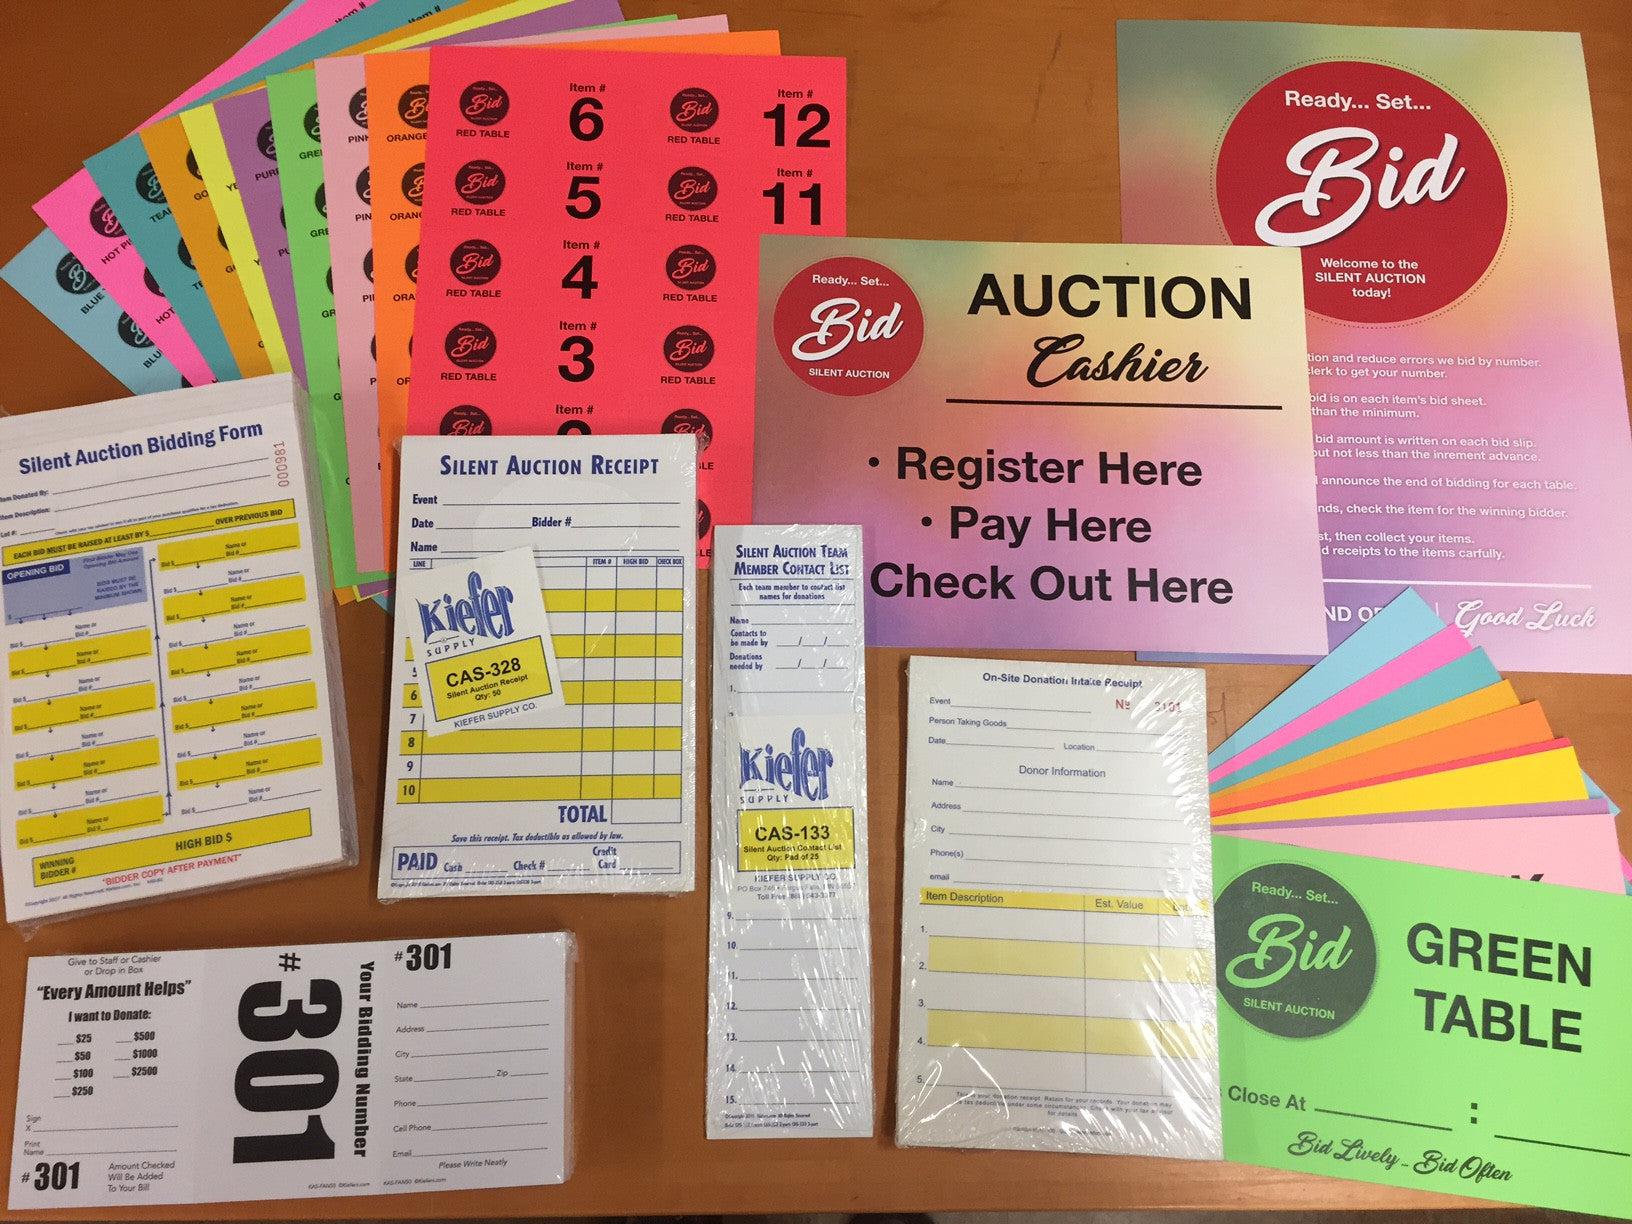 NEW Silent Auction Kit (just $9.85 shipping)